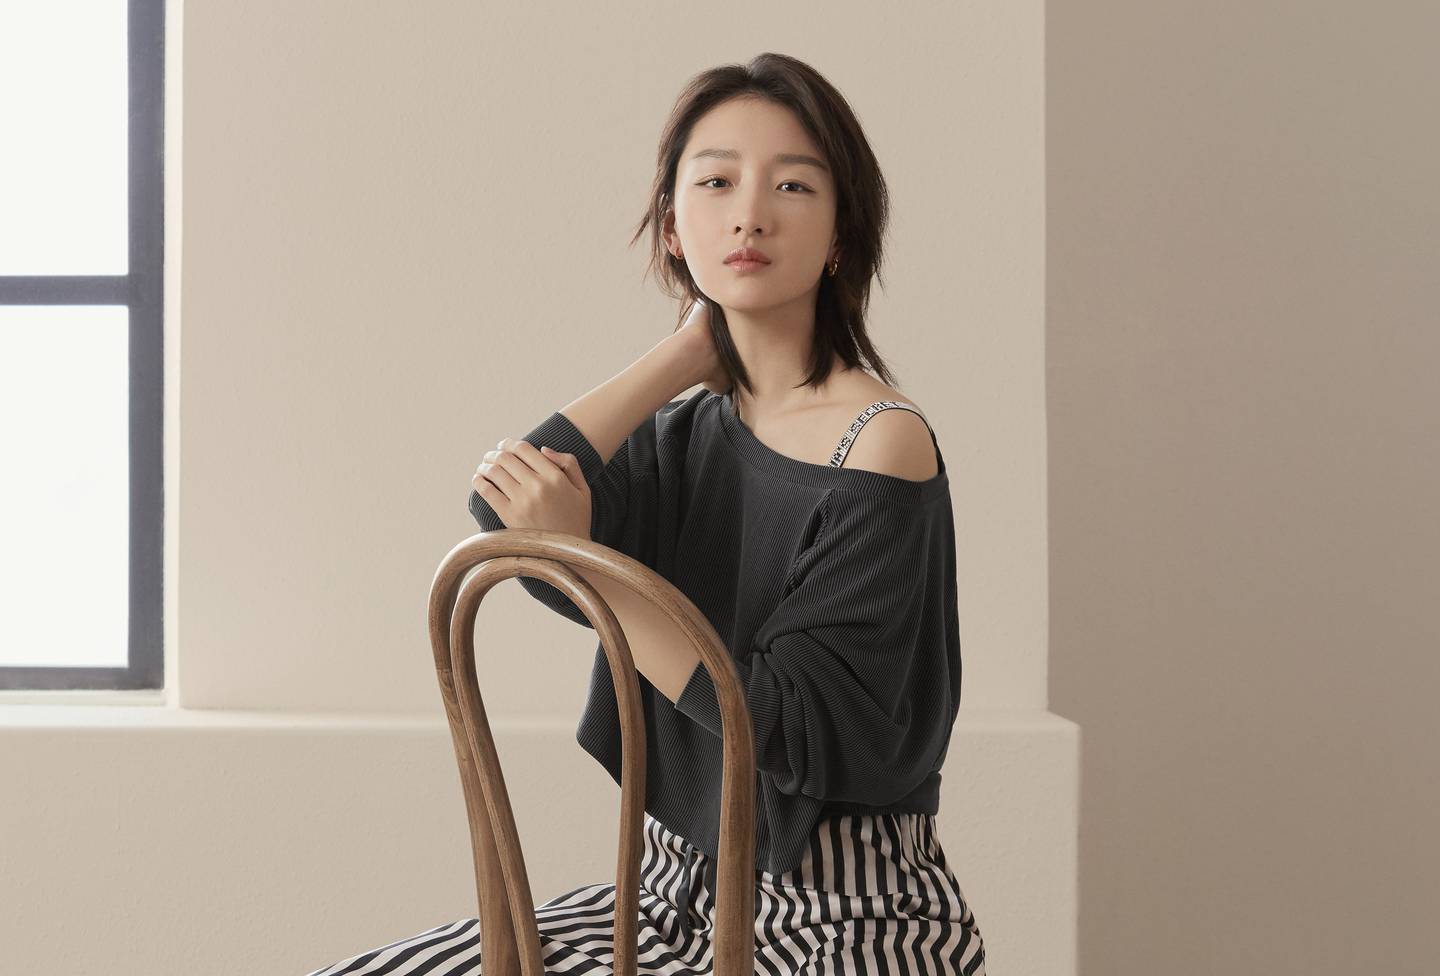 Actress Zhou Dongyu was named a Victoria's Secret ambassador in China in April 2020. Victoria's Secret.